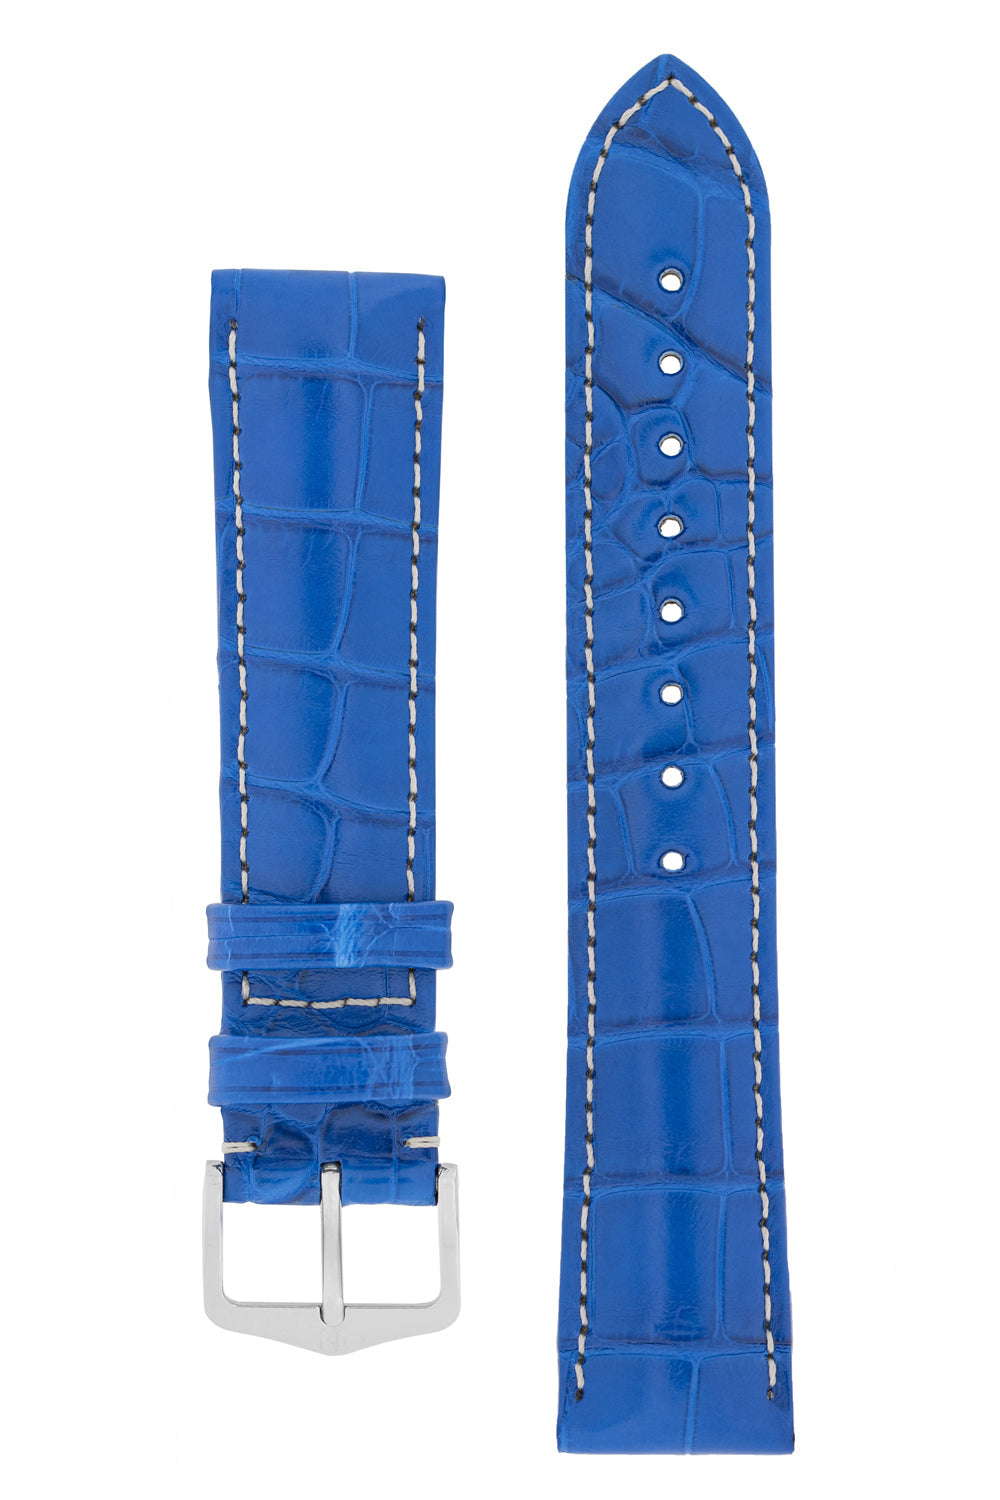 Hirsch Connoisseur Genuine Alligator Watch Strap in Royal Blue (with Polished Silver Steel H-Tradition Buckle)